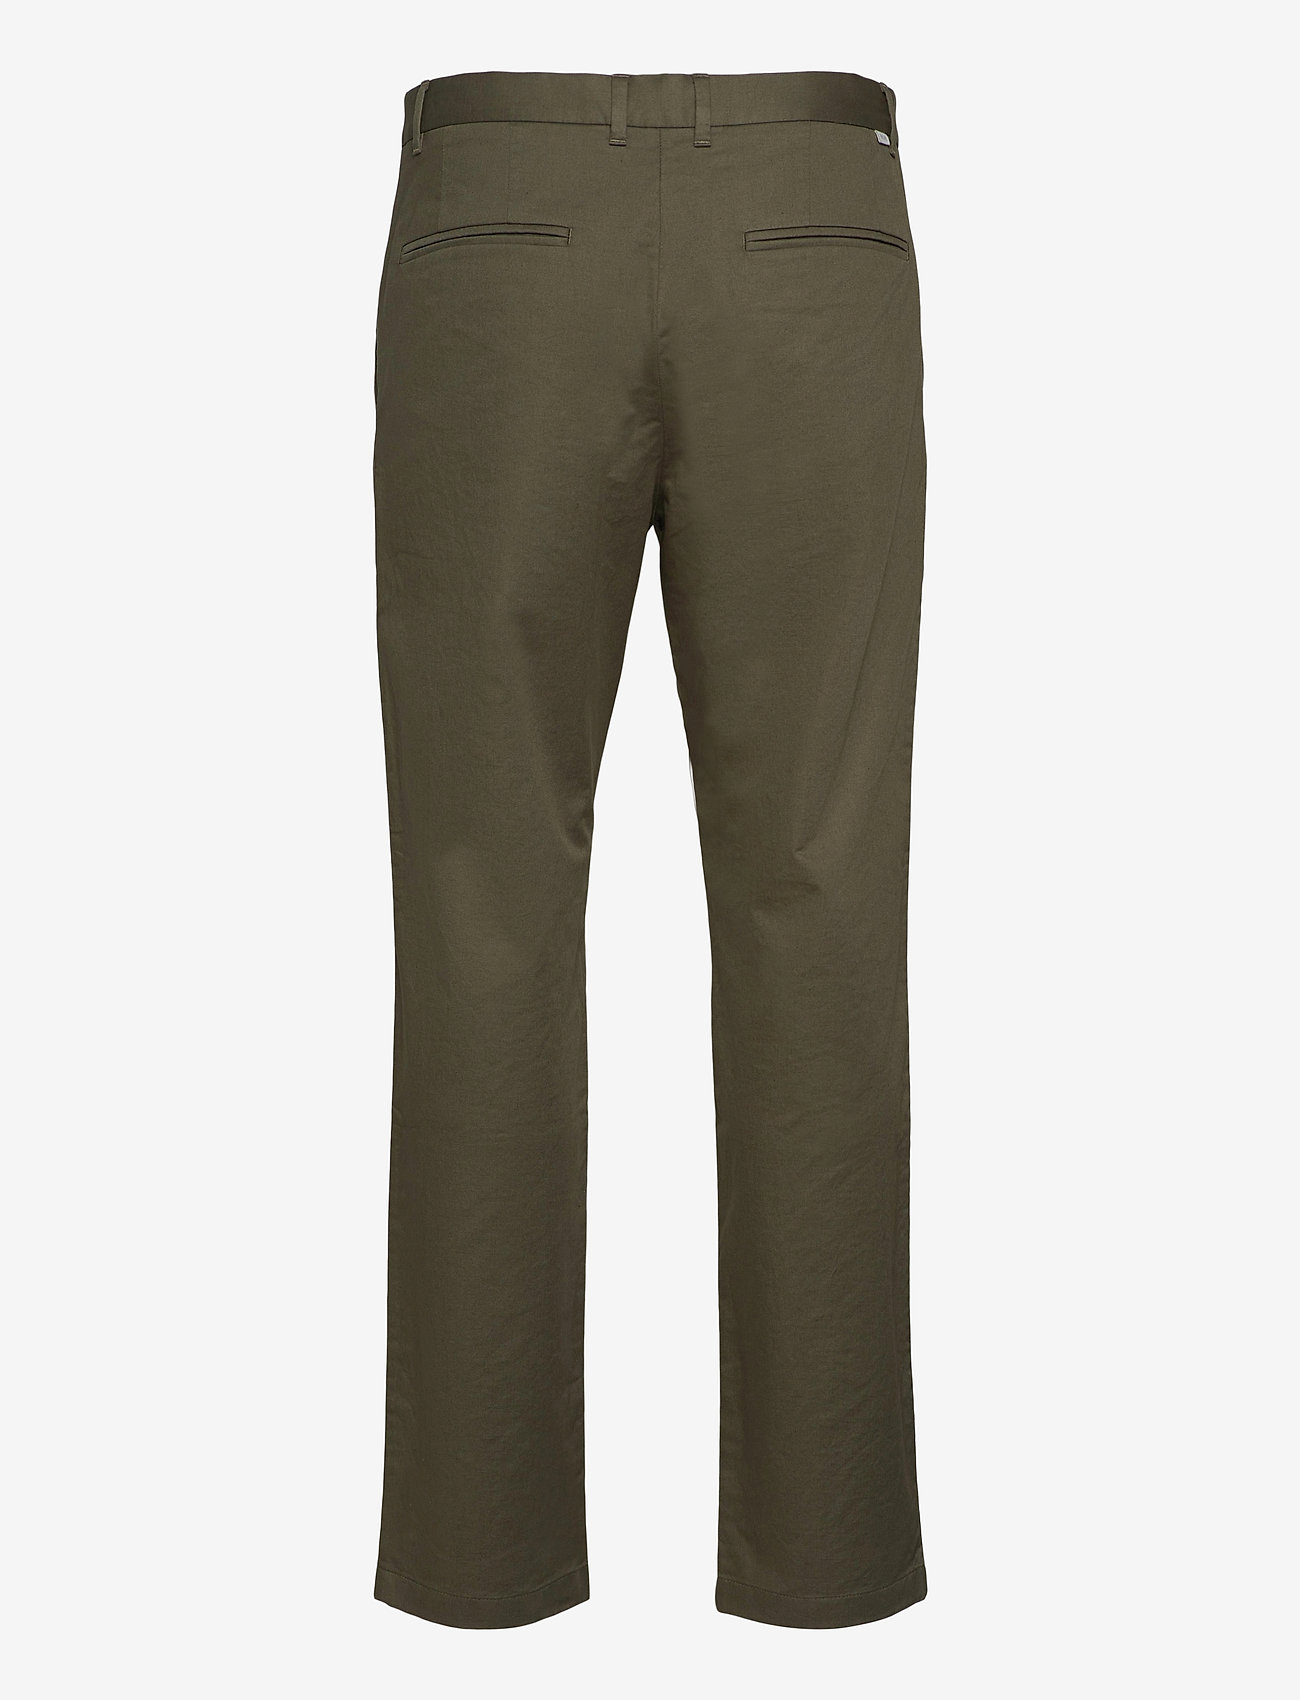 Wood Wood - Marcus light twill trousers - chinosy - olive - 1